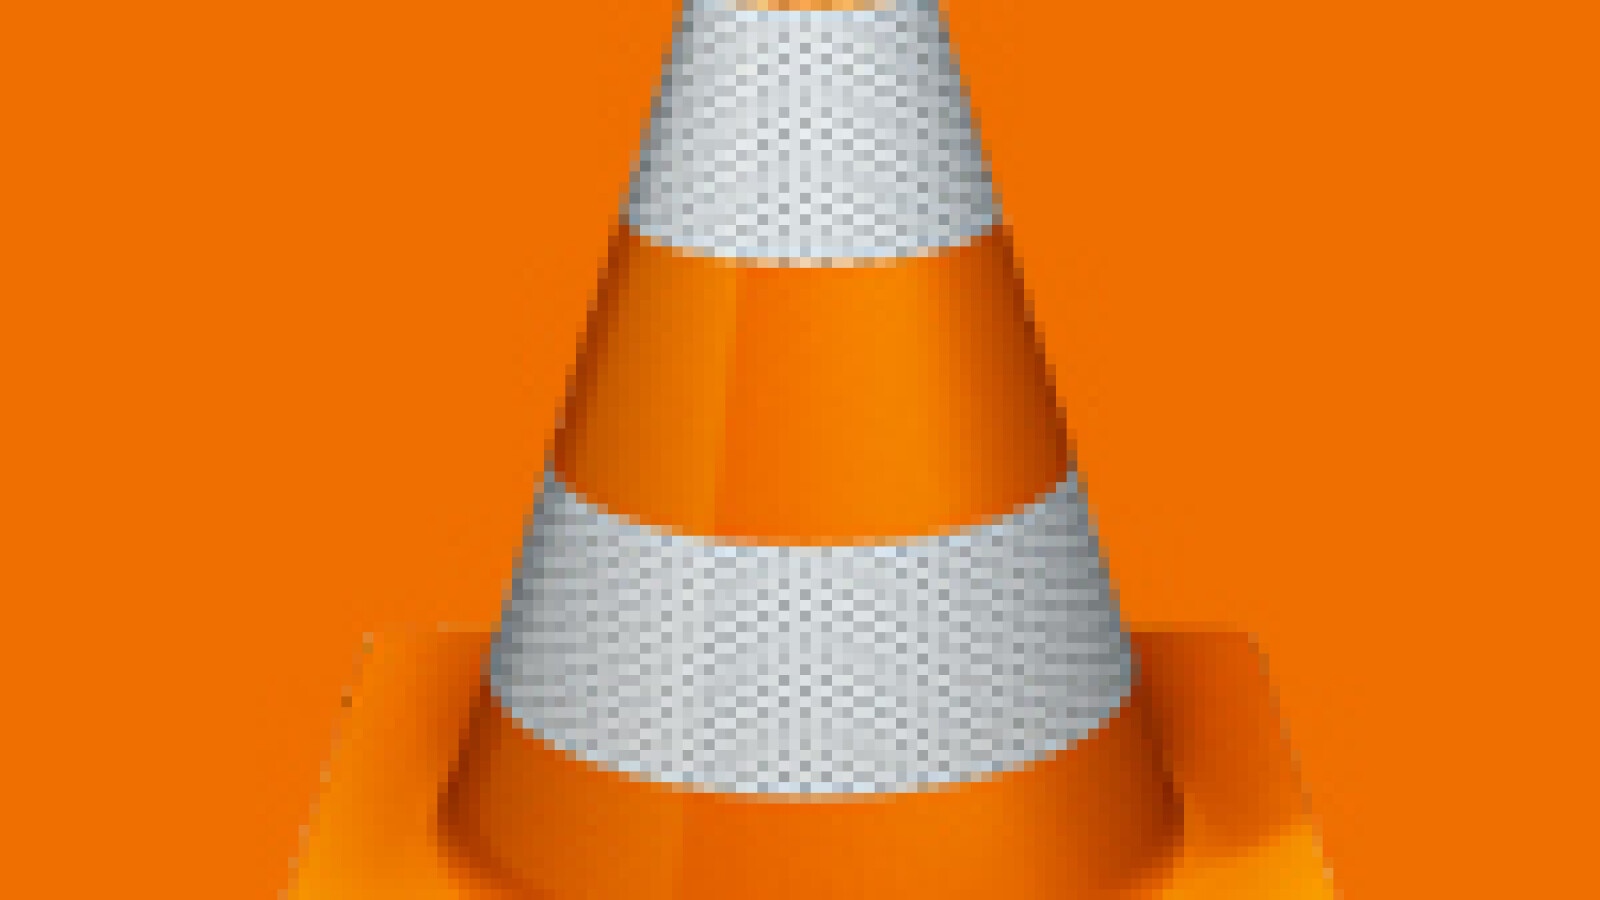 vlc media player download youtube